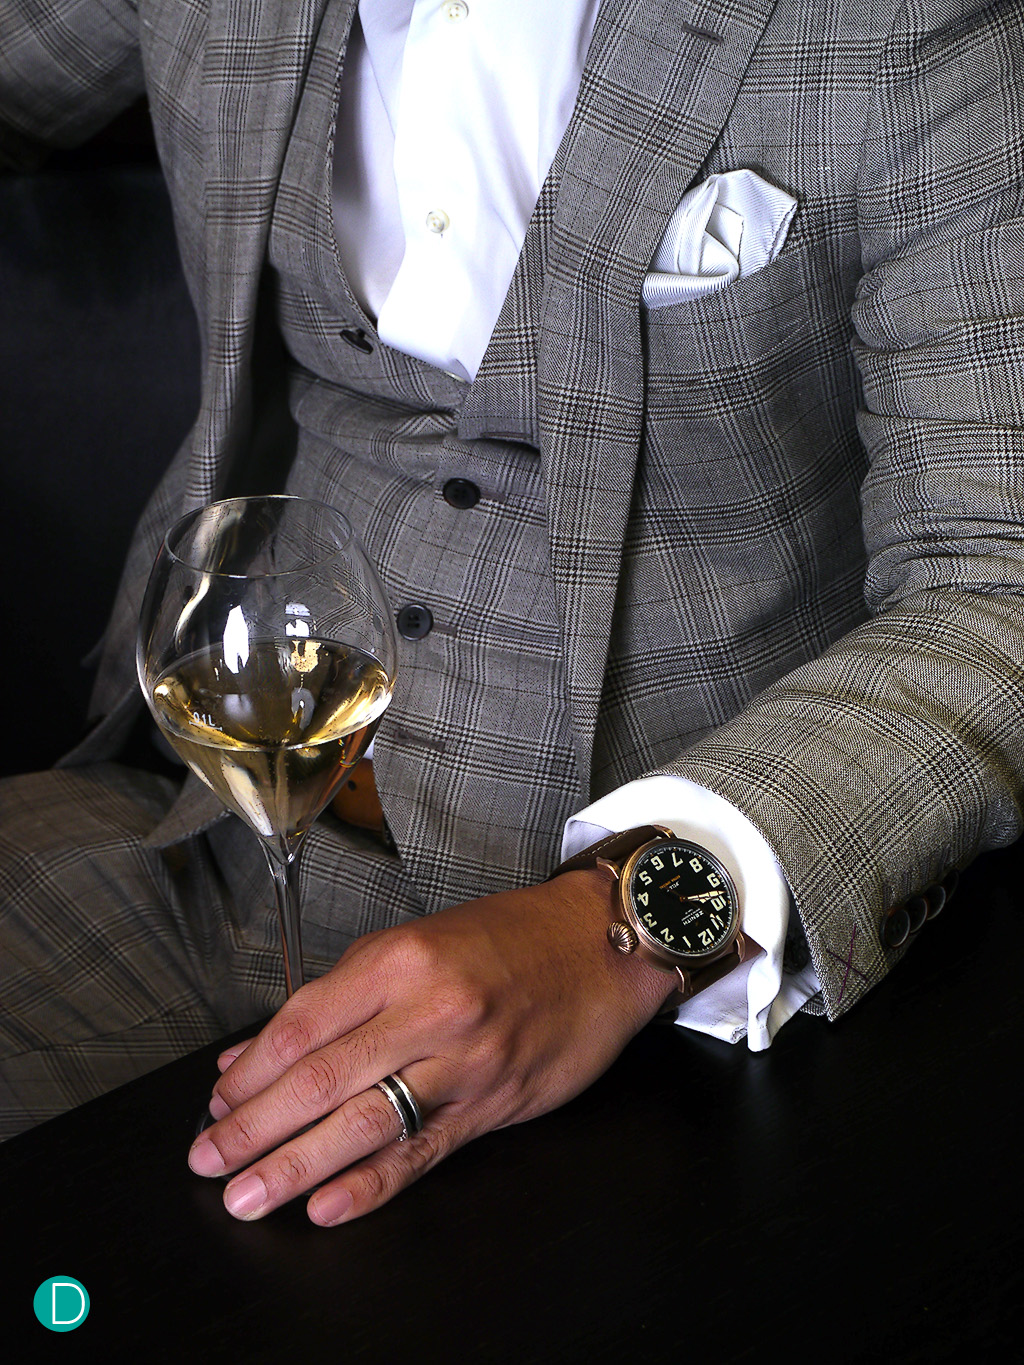 Seen here on Charle's wrist, the Bronze Extra Special adds a finishing touch to the Prince of Wales fabric, and sits comfortably with french cuffs.